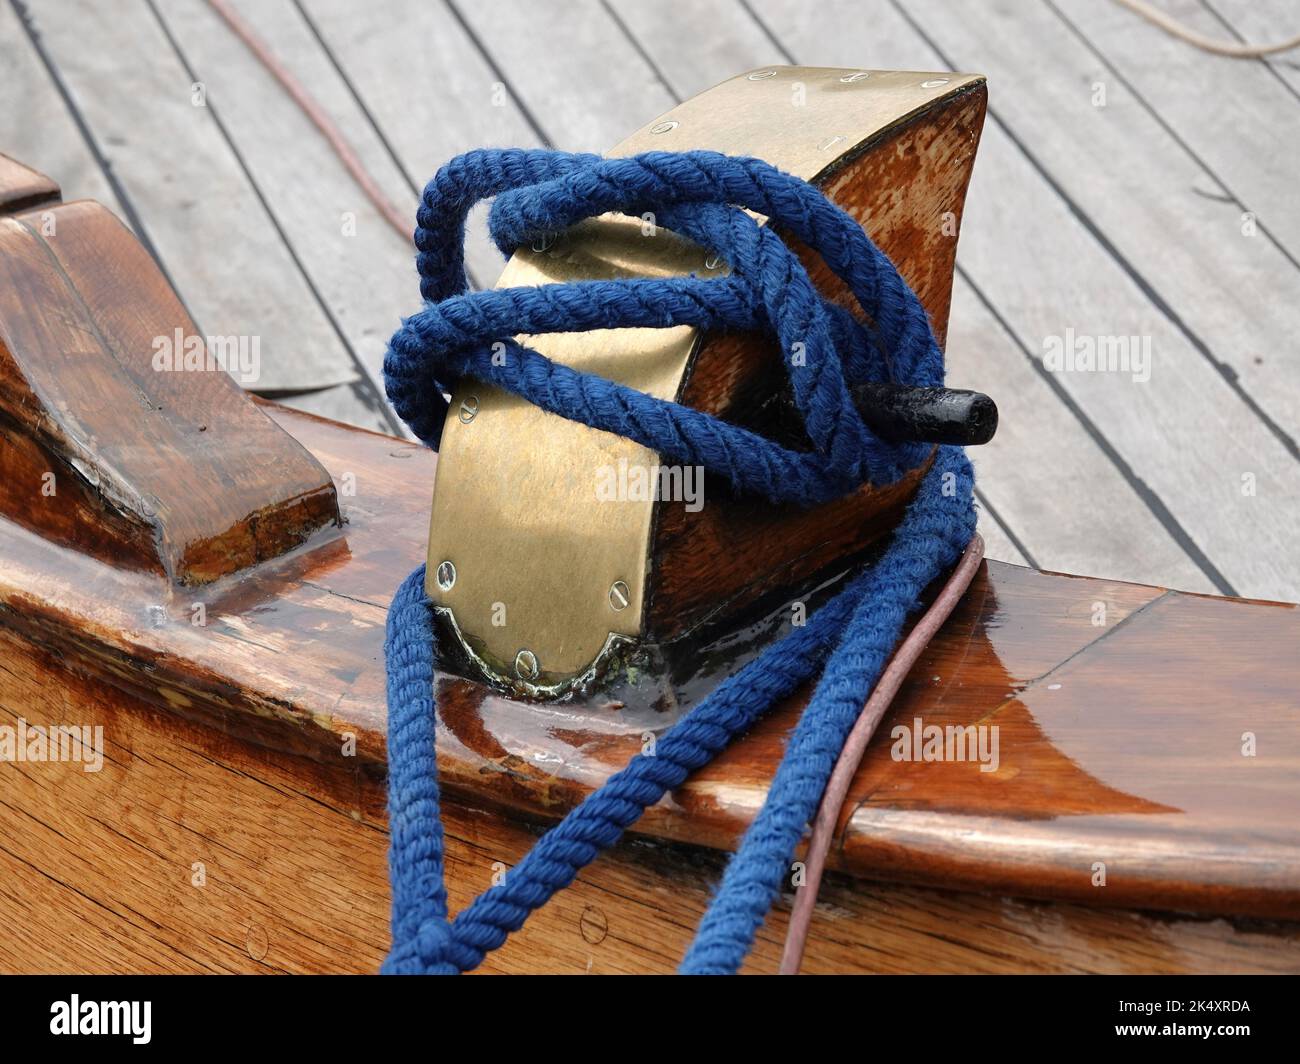 Mooring bollard on the deck of a wooden ship with a blue rope. Stock Photo